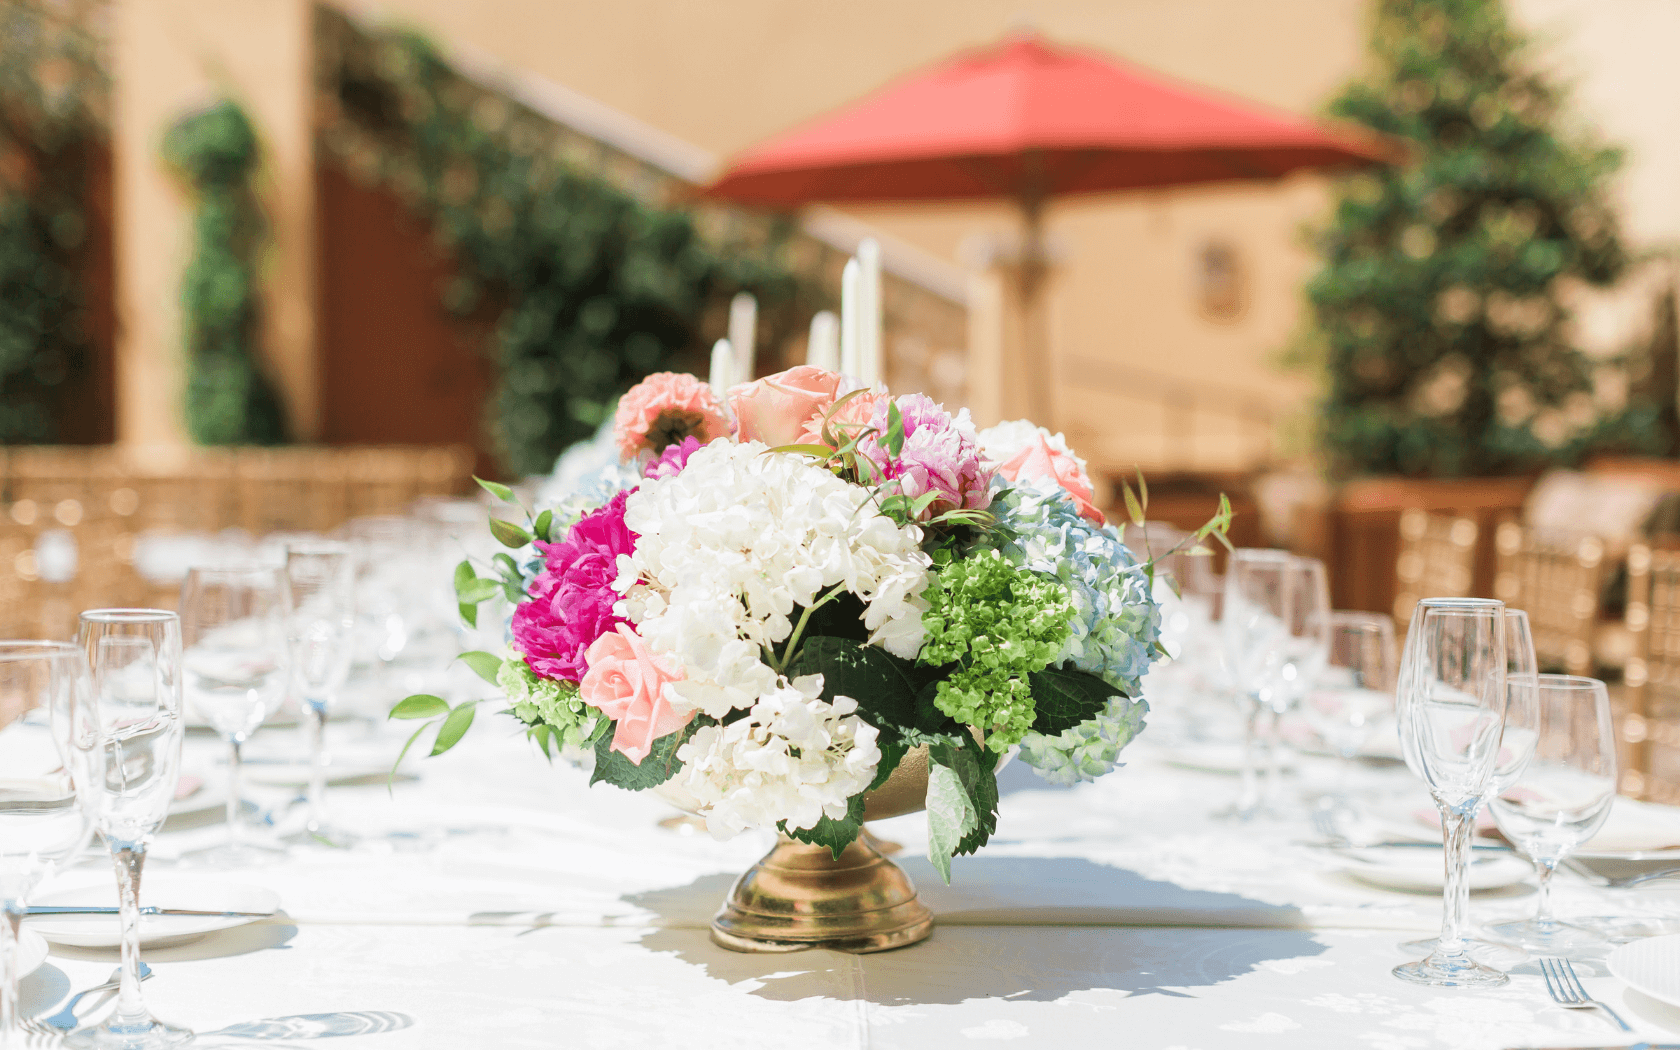 wedding floral arrangement on table outside in courtyard